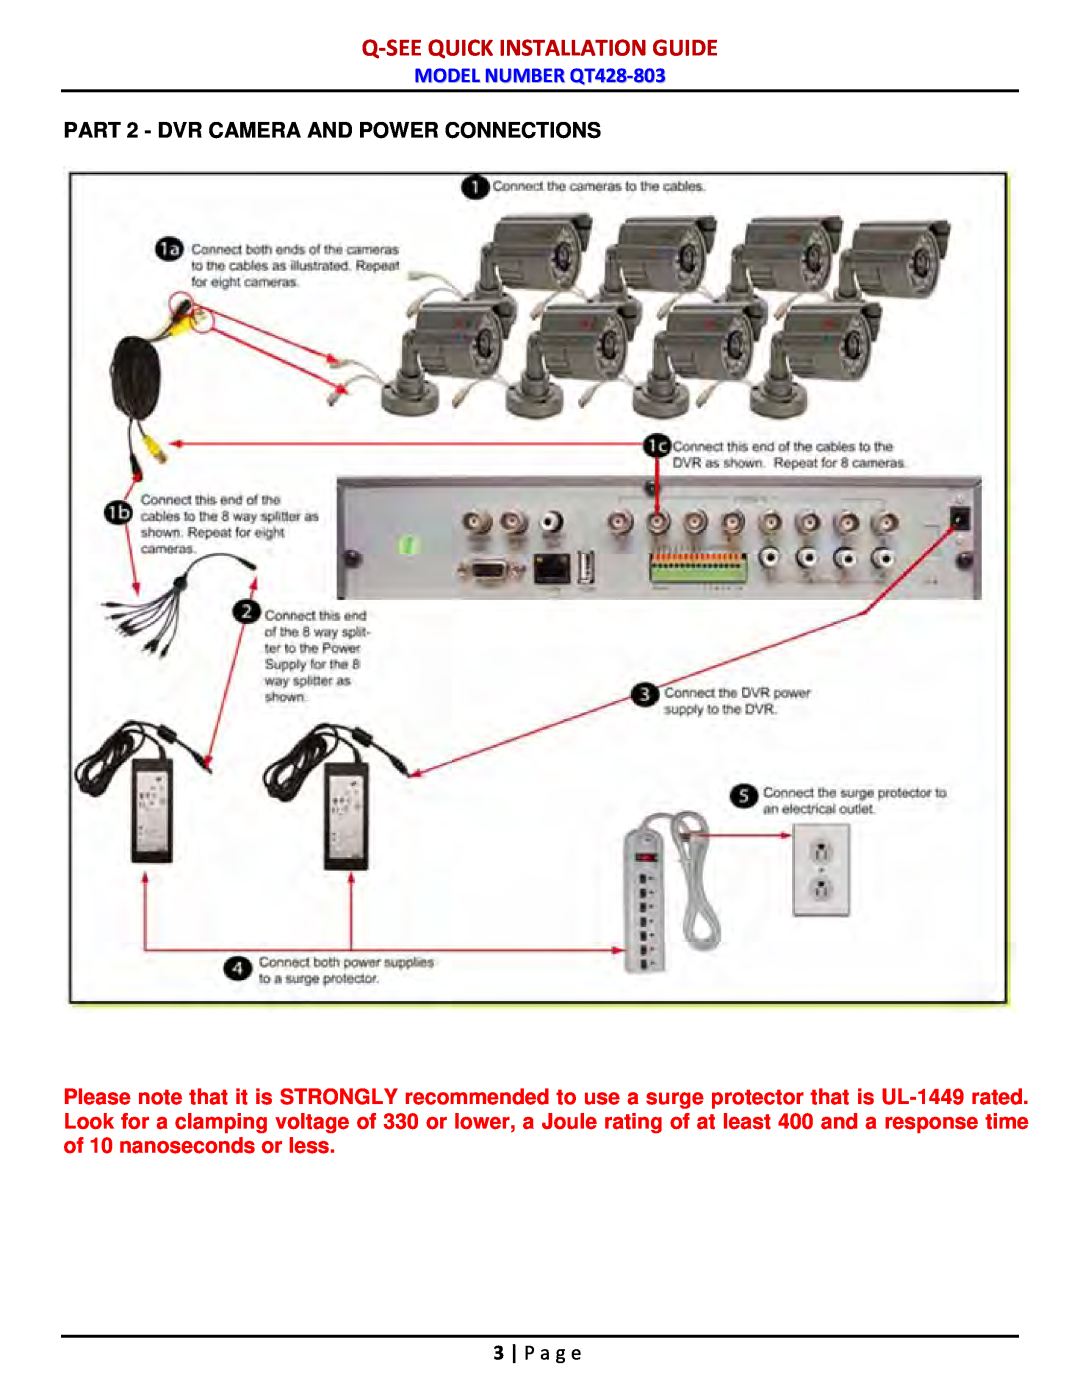 Q-See manual PART 2 - DVR CAMERA AND POWER CONNECTIONS, P a g e, Q-Seequick Installation Guide, MODEL NUMBER QT428-803 